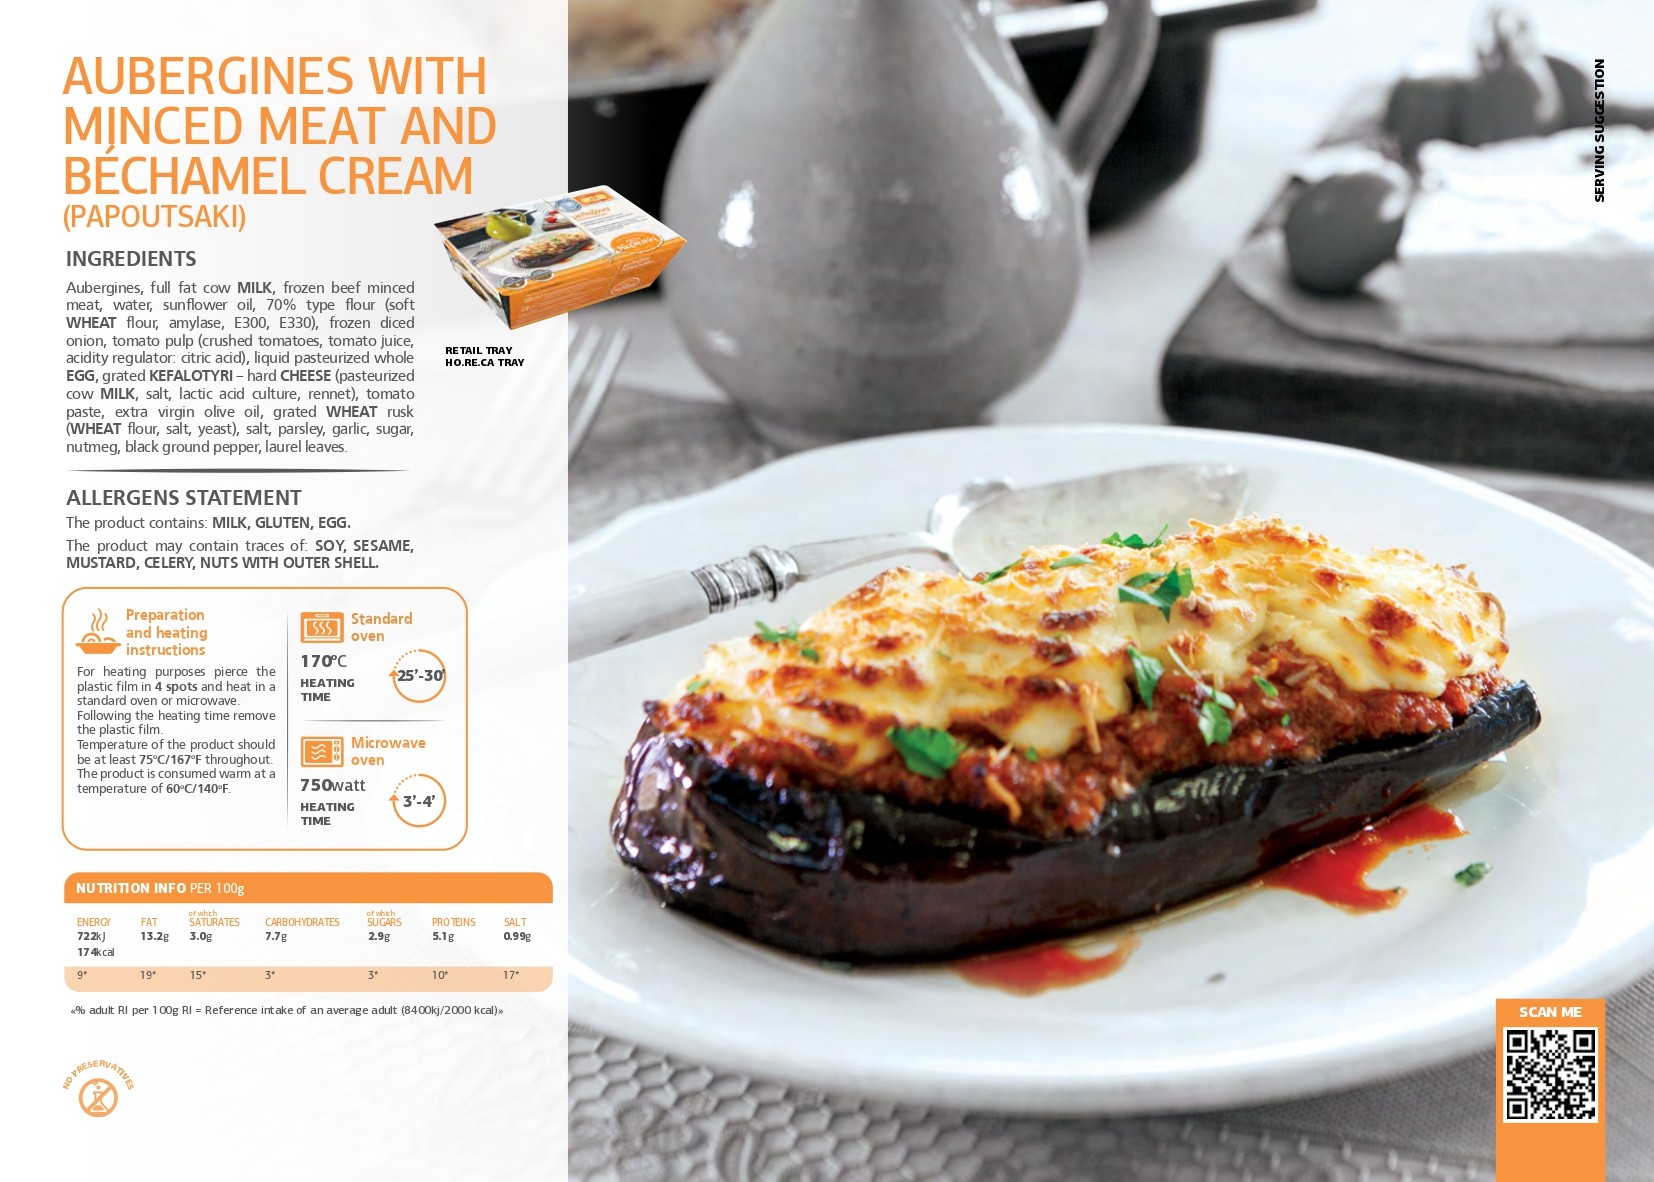 SK - Aubergines with minced meat and béchamel cream (Papoutsaki) pdf image